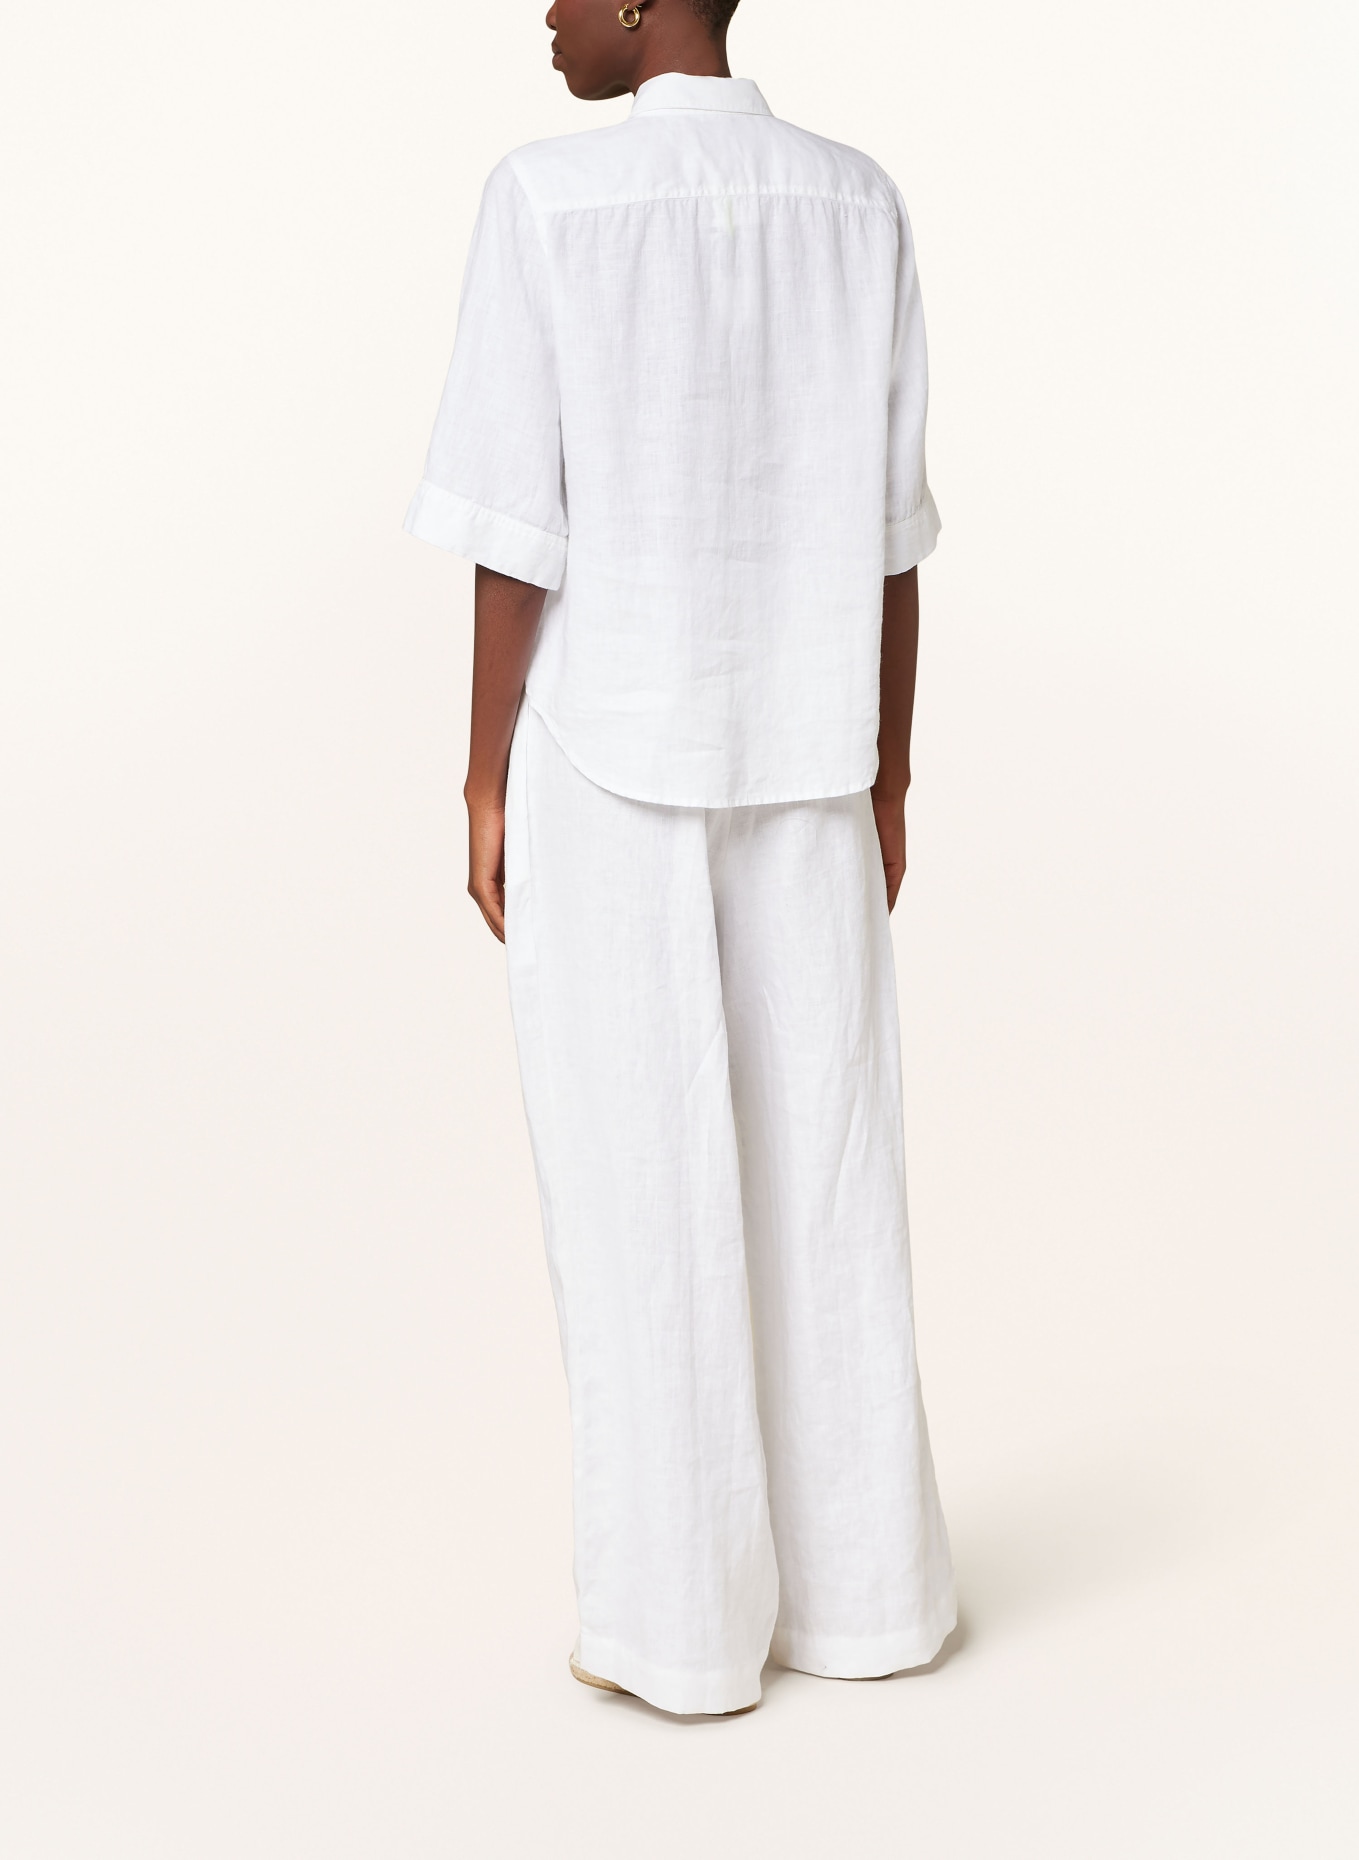 TONNO & PANNA Shirt blouse made of linen, Color: WHITE (Image 3)